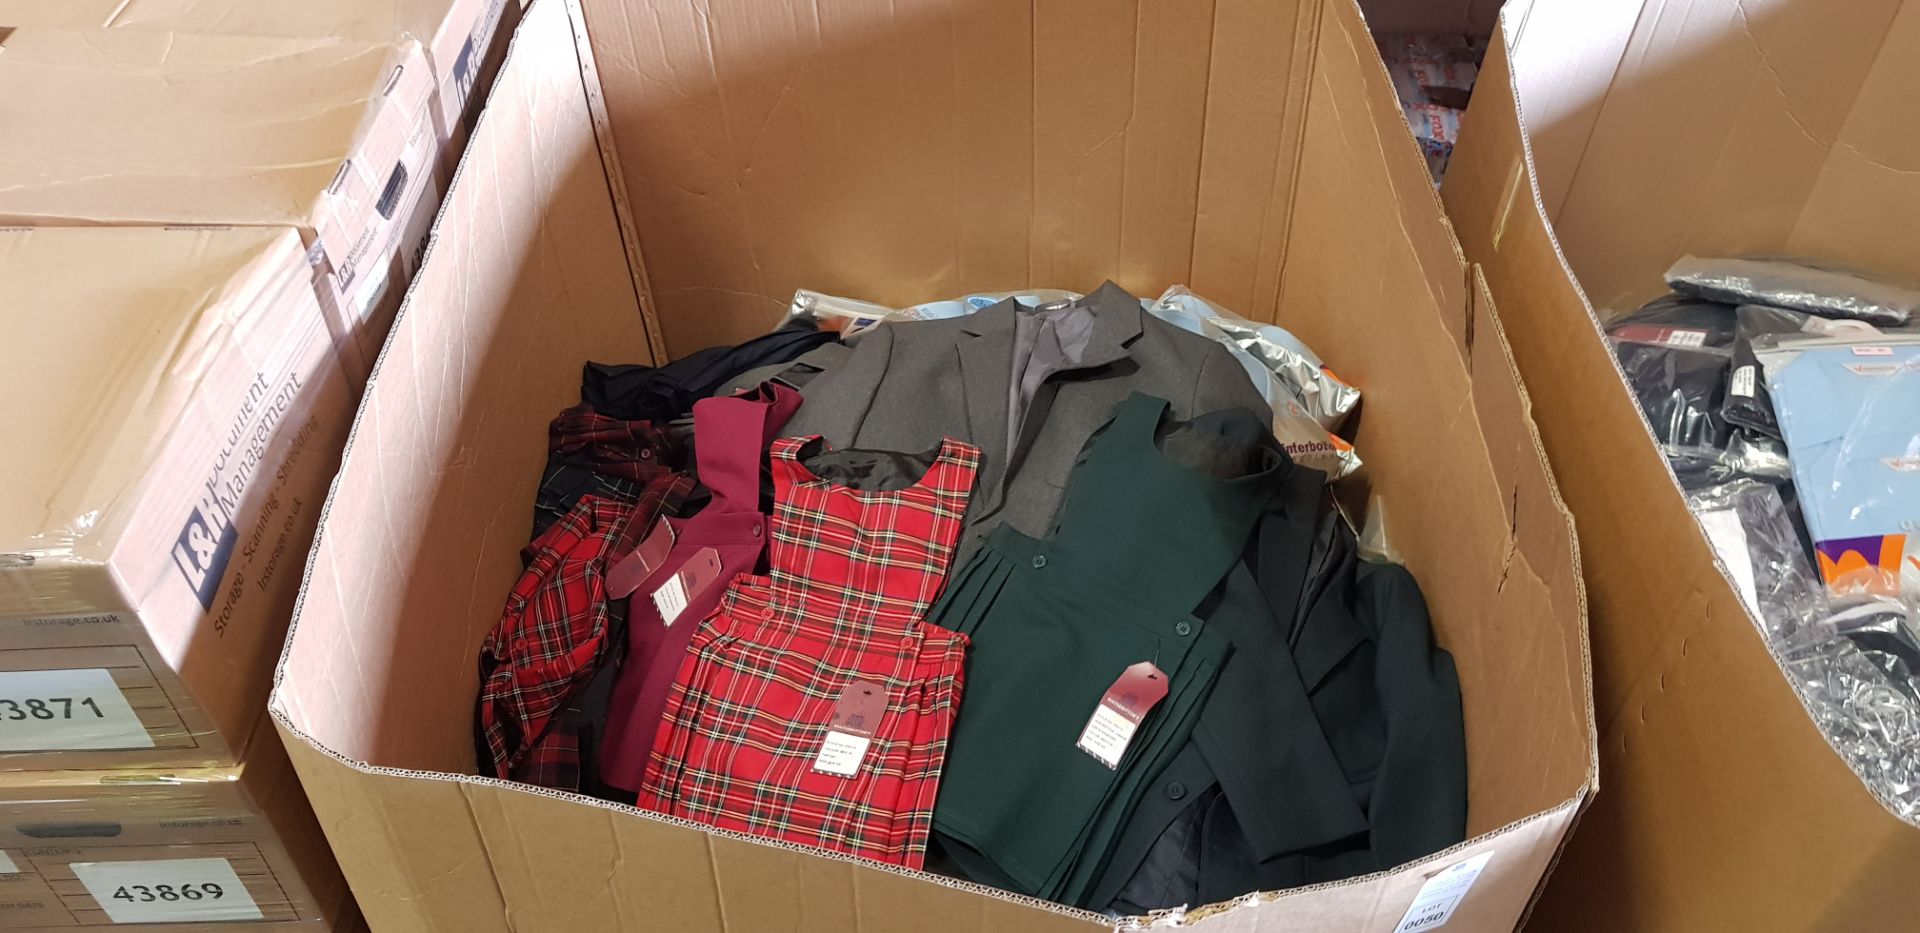 260 X BRAND NEW MIXED WINTERBOTTOMS CLOTHING LOT CONTAINING WINTERBOTTOMS BLAZERS, SKIRTS,CARDIGANS,